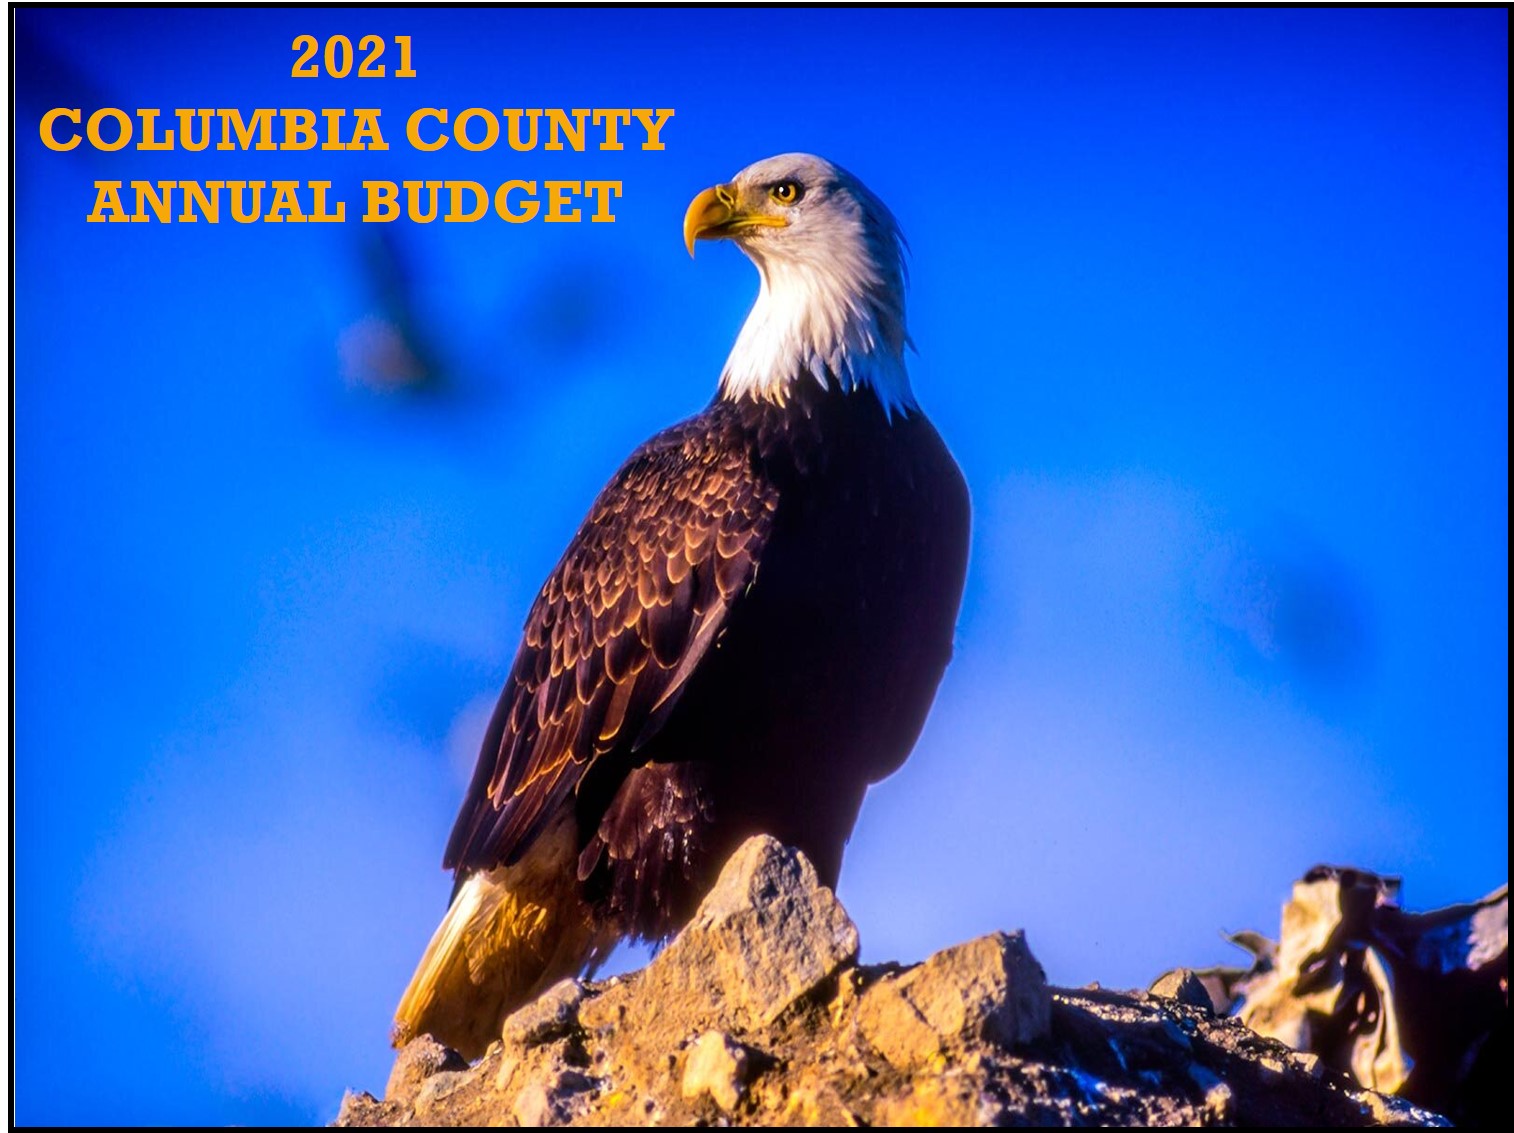 2021 Proposed Budget